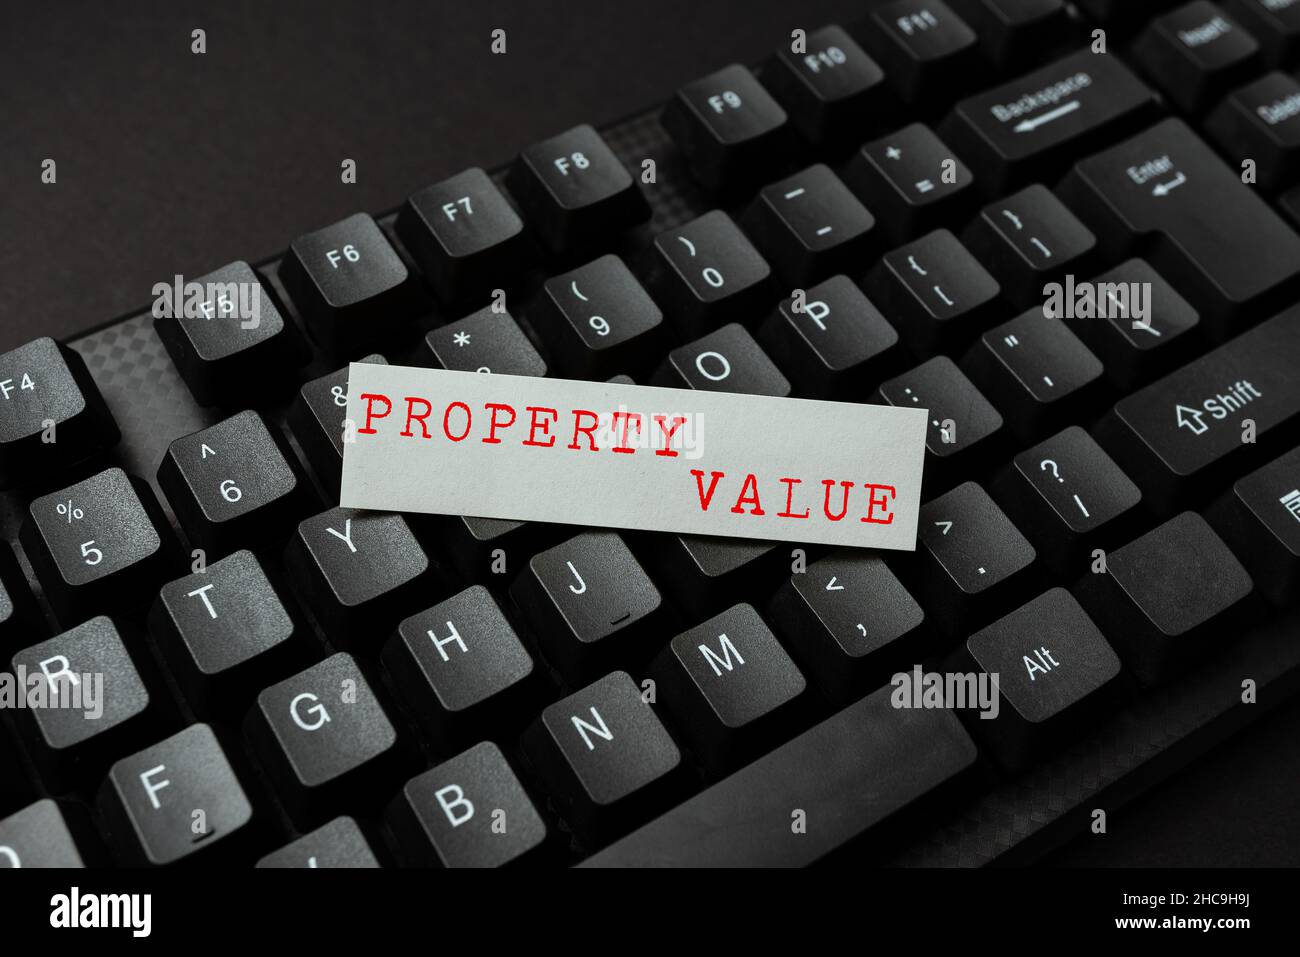 Text showing inspiration Property Value. Business idea Worth of a land Real estate appraisal Fair market price Entering New Programming Codes, Typing Stock Photo